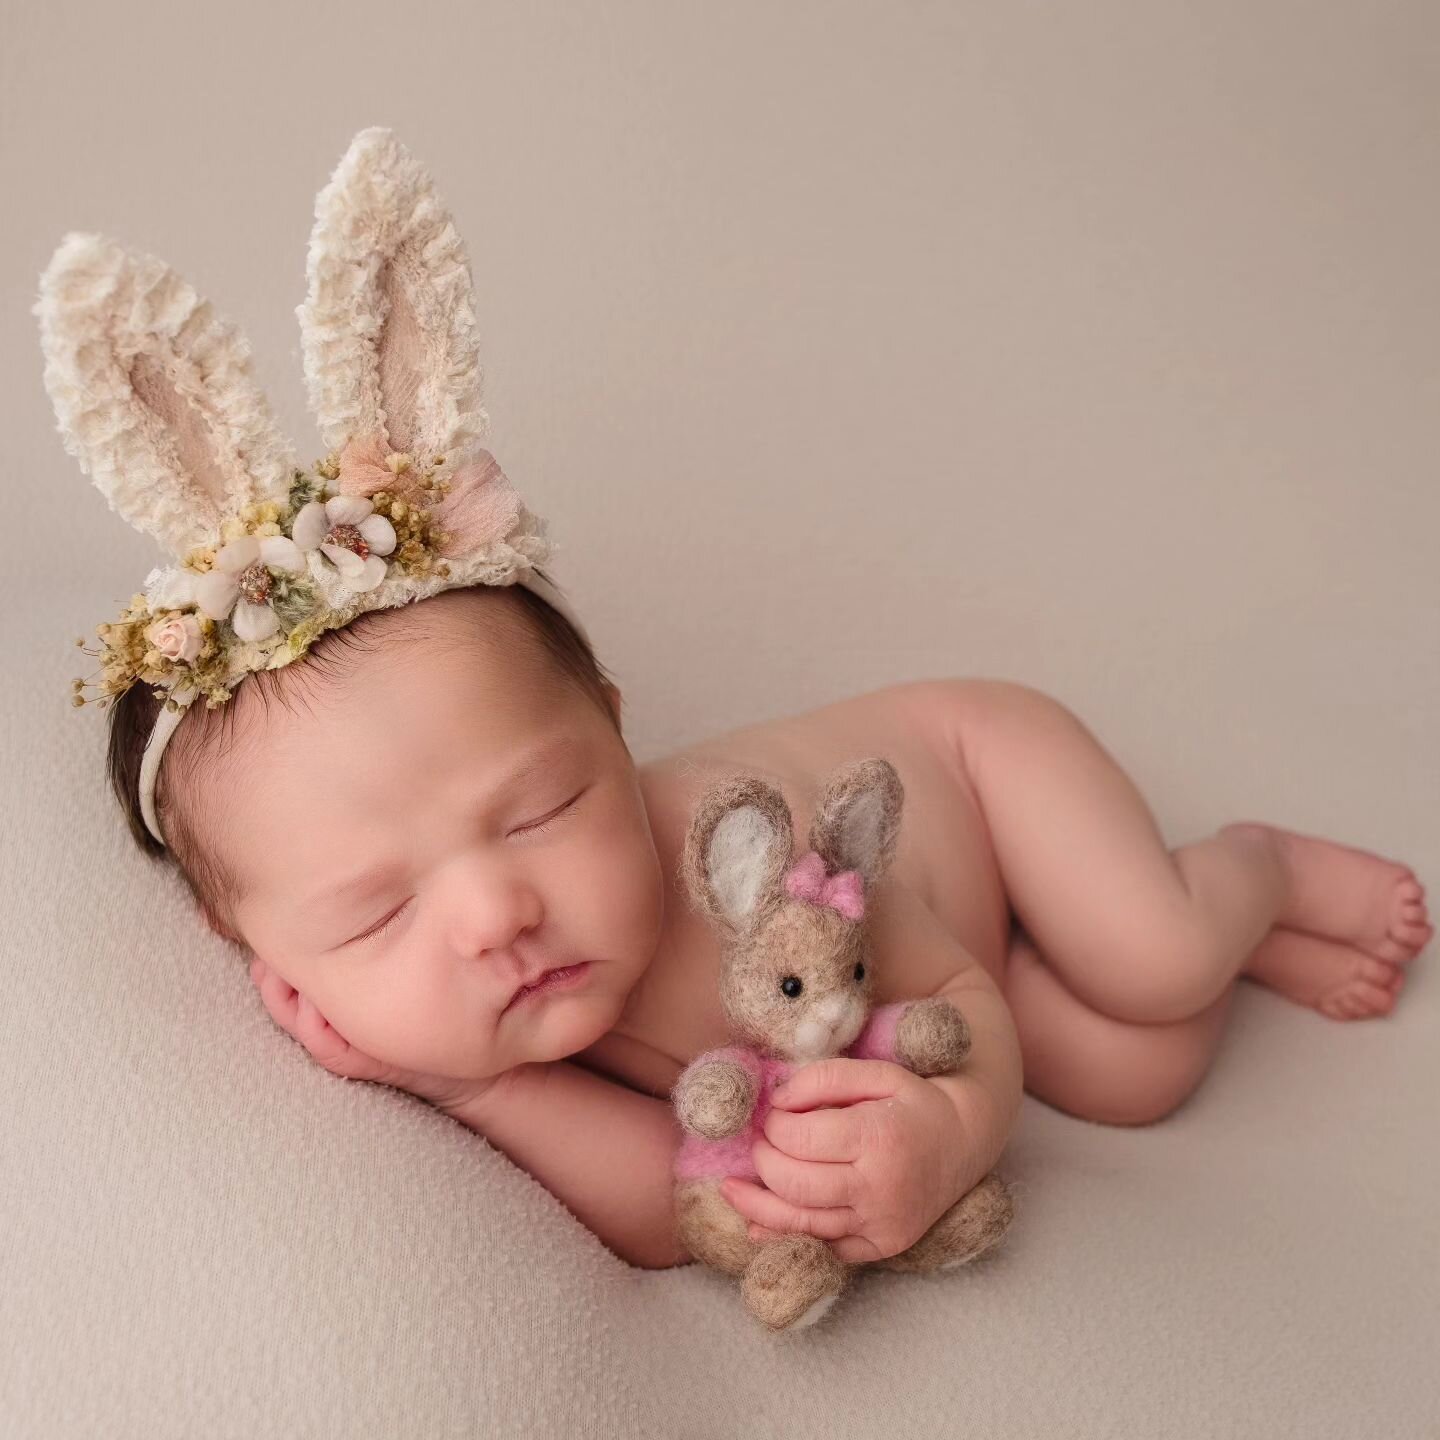 🐰 Happy Easter 🐰

I've really missed running Easter mini sessions this year and creating those gorgeous bunny themed memories for lots of families. 

We will be back for them next year, especially so I can have another excuse to put these bunny ear